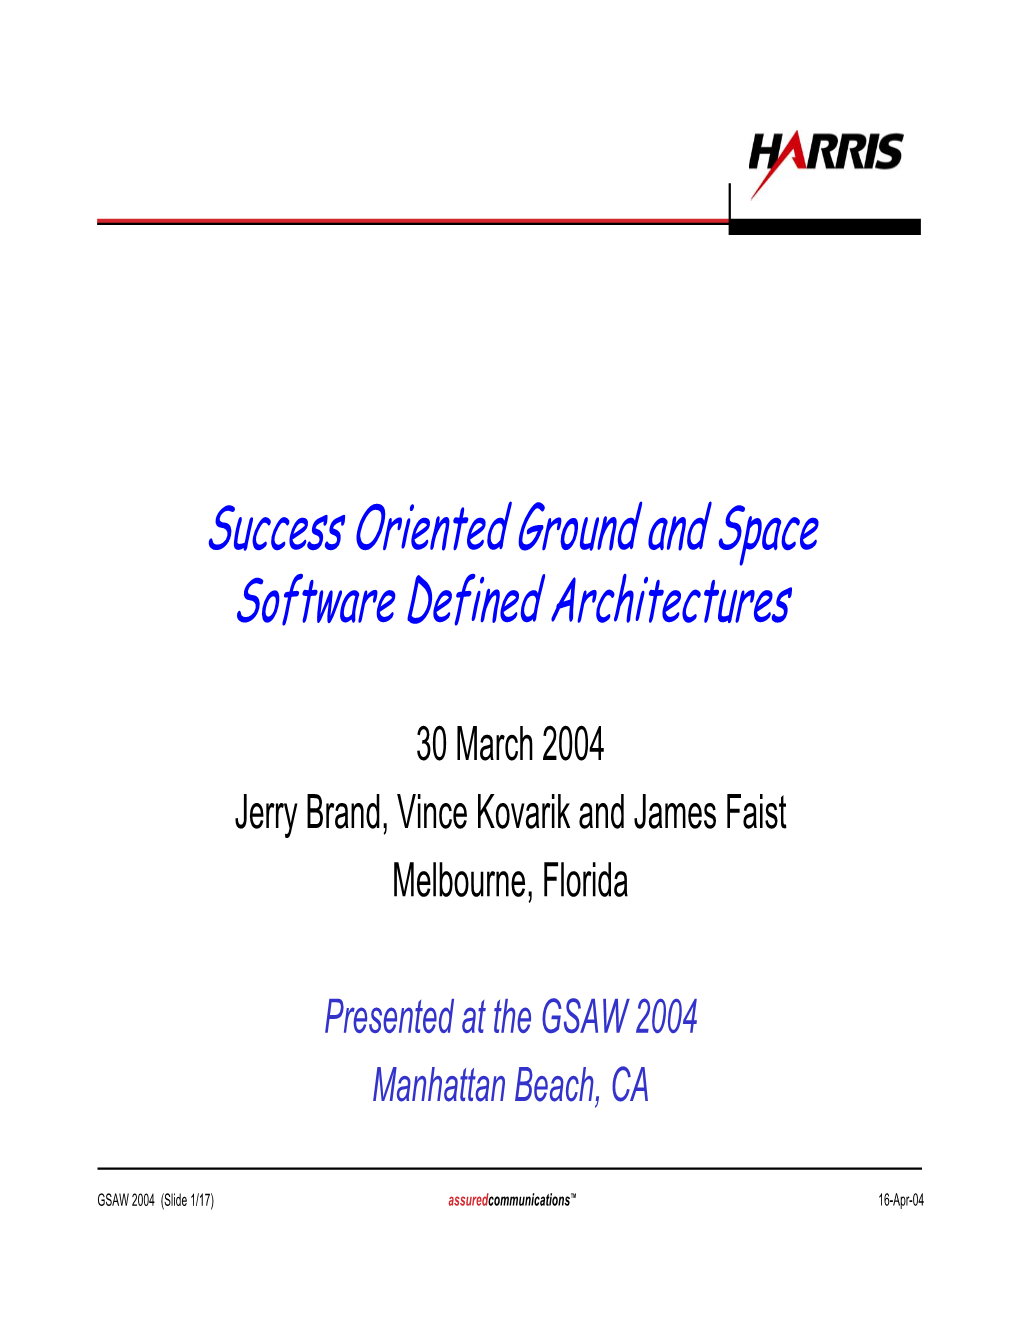 Success Oriented Ground and Space Software Defined Architectures